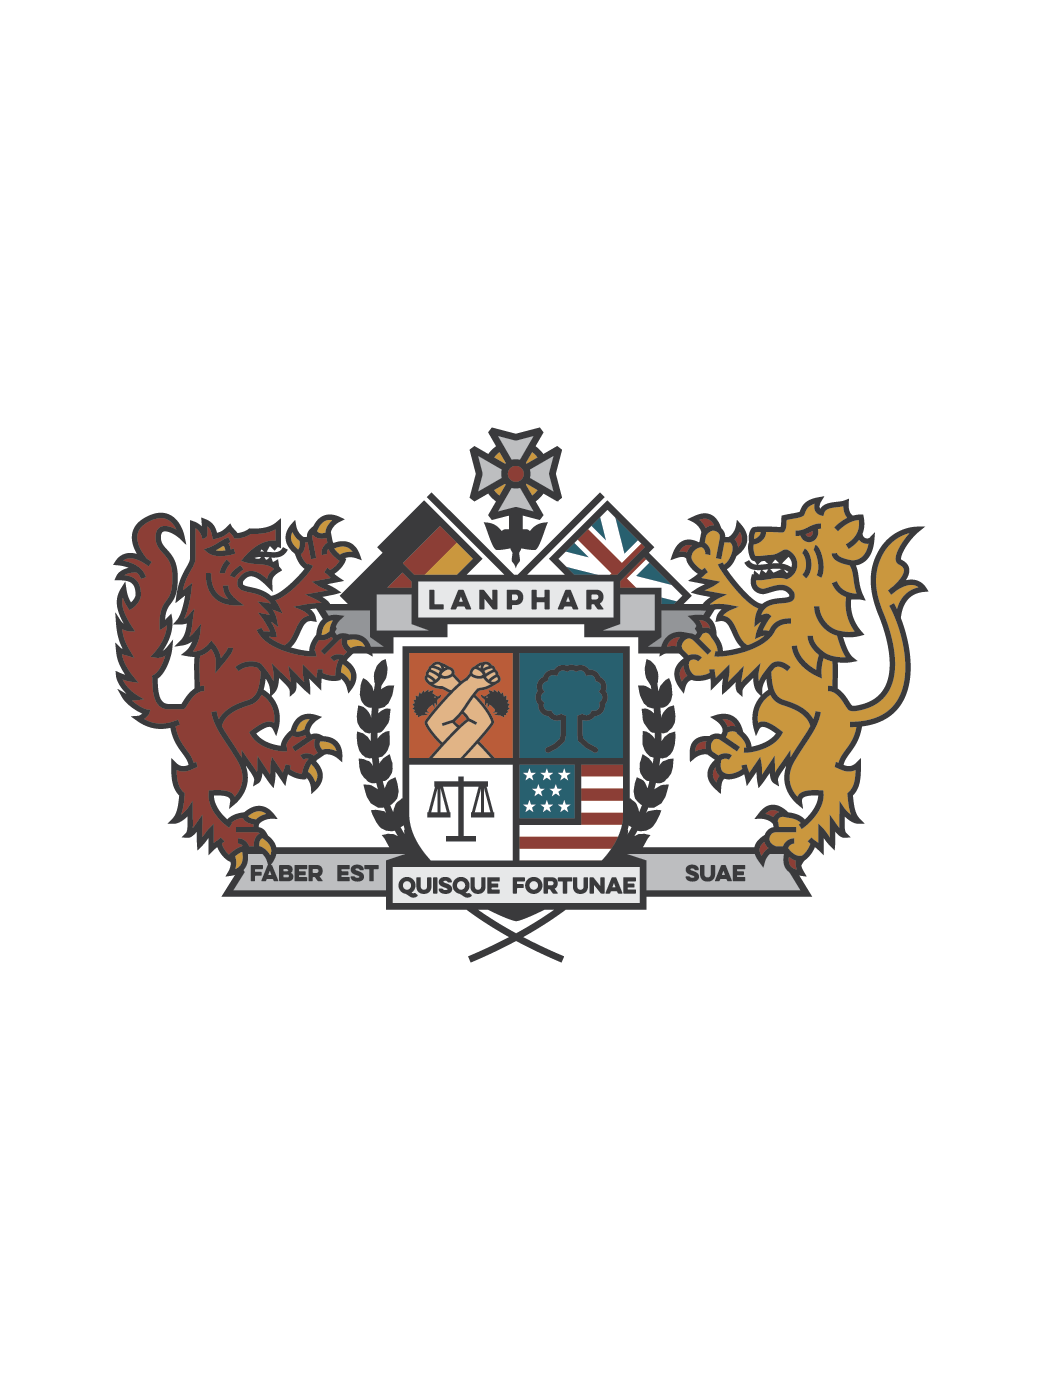 The color version of a Family Crest design, including elements that represent the famil